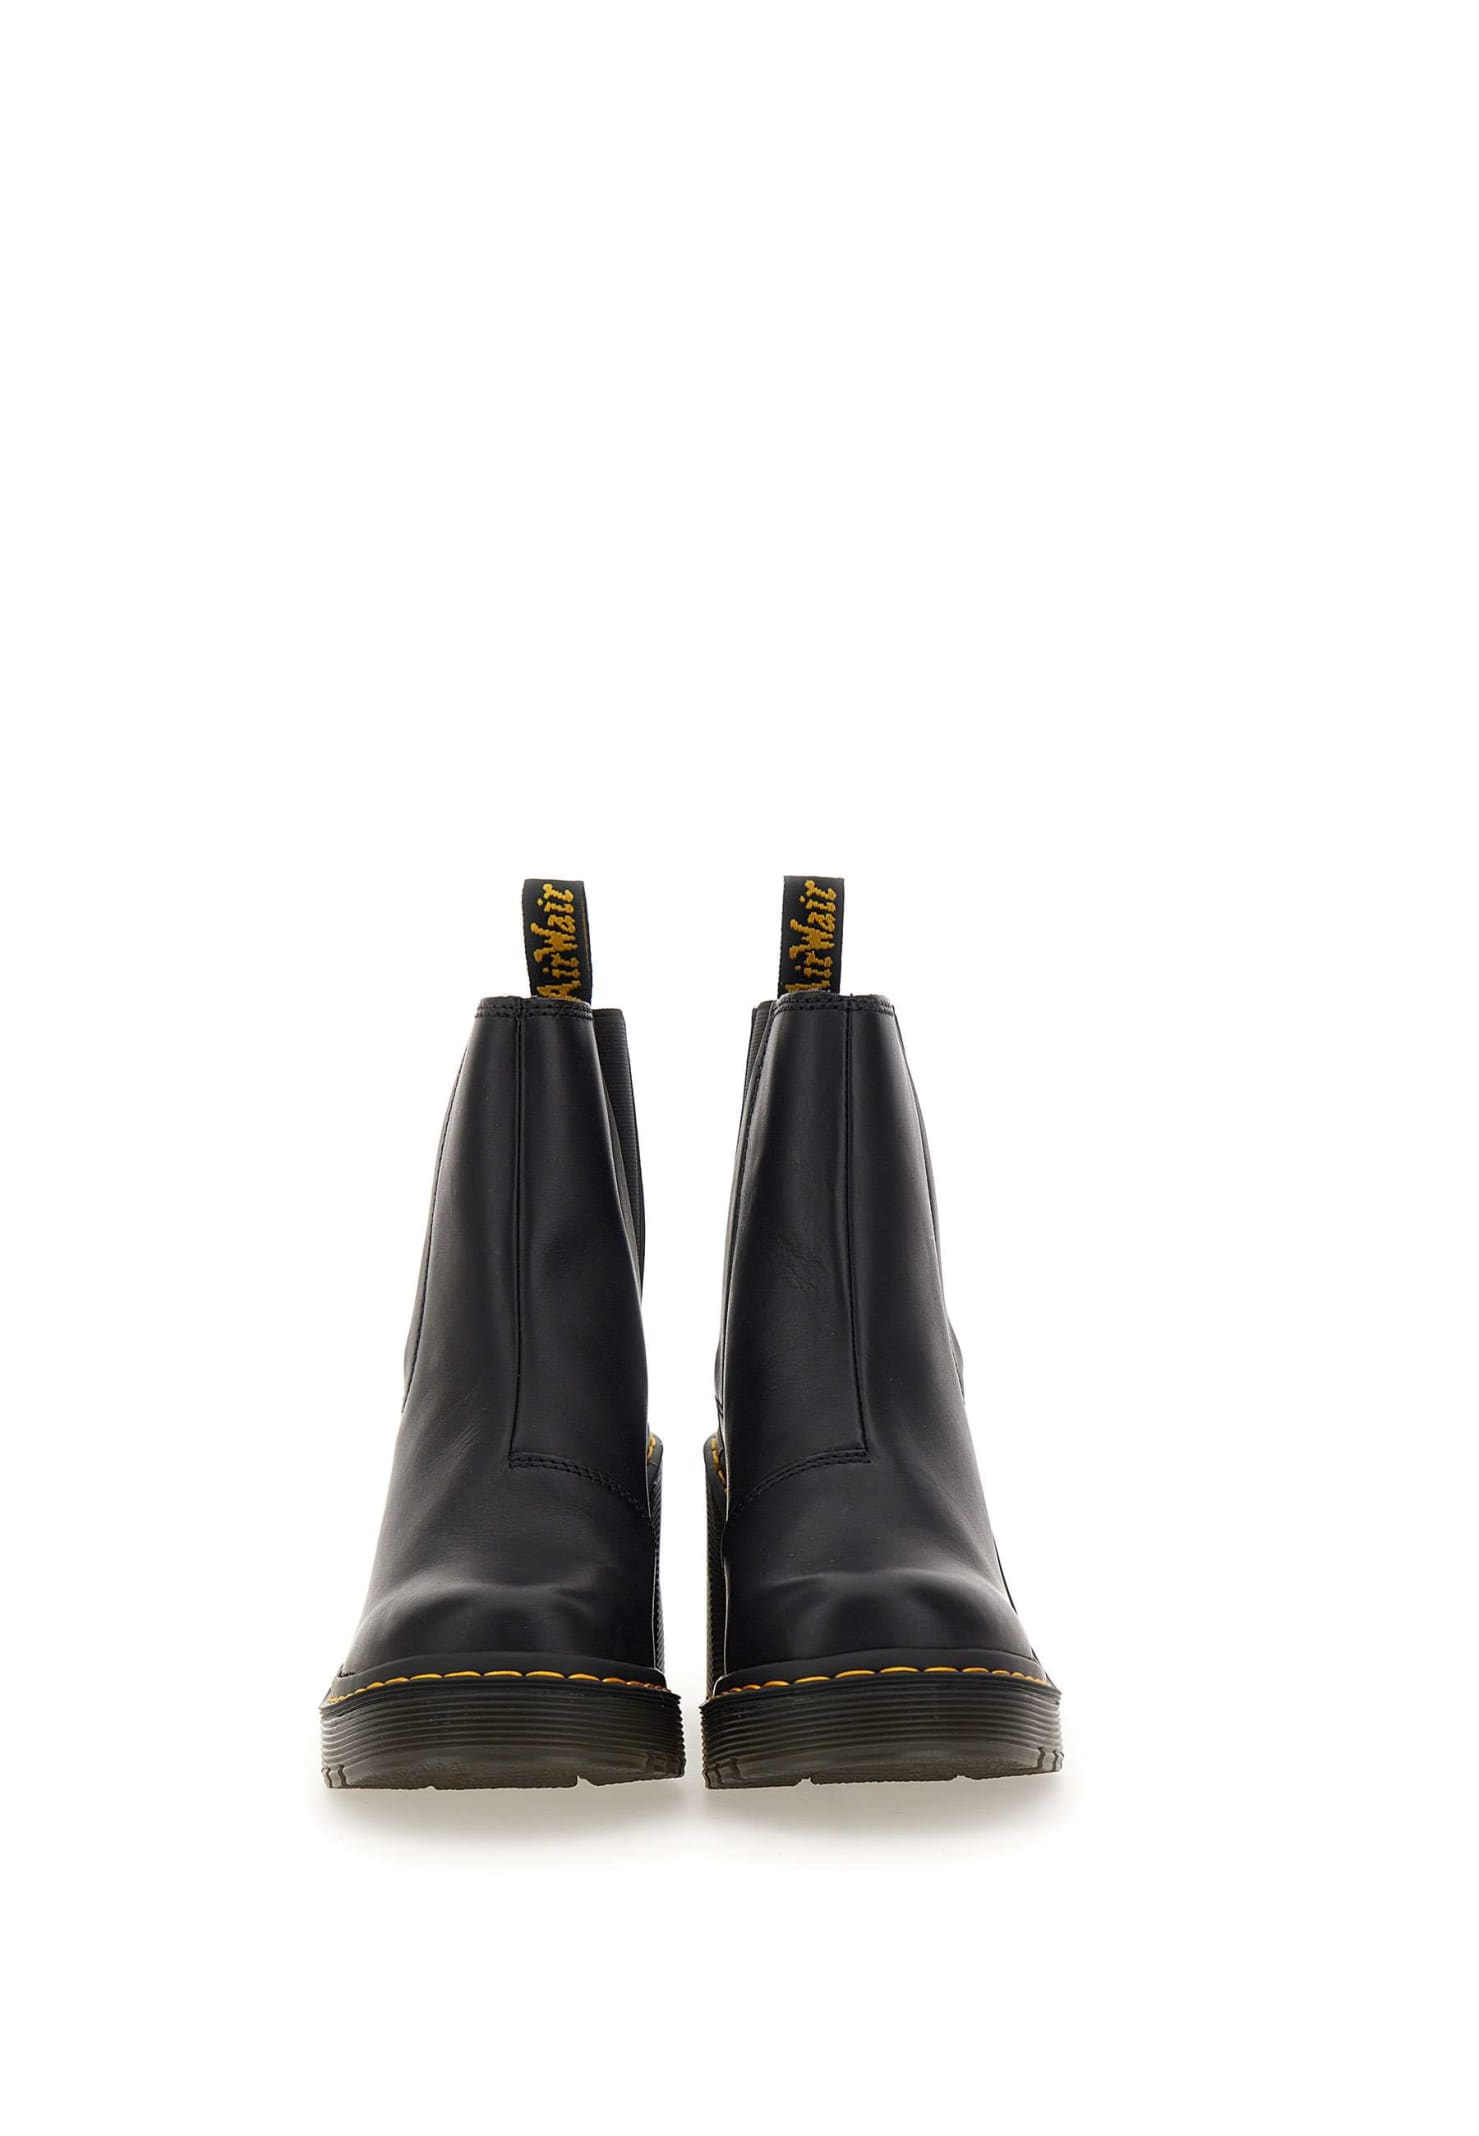 Shop Dr. Martens' Spence Leather Ankle Boots